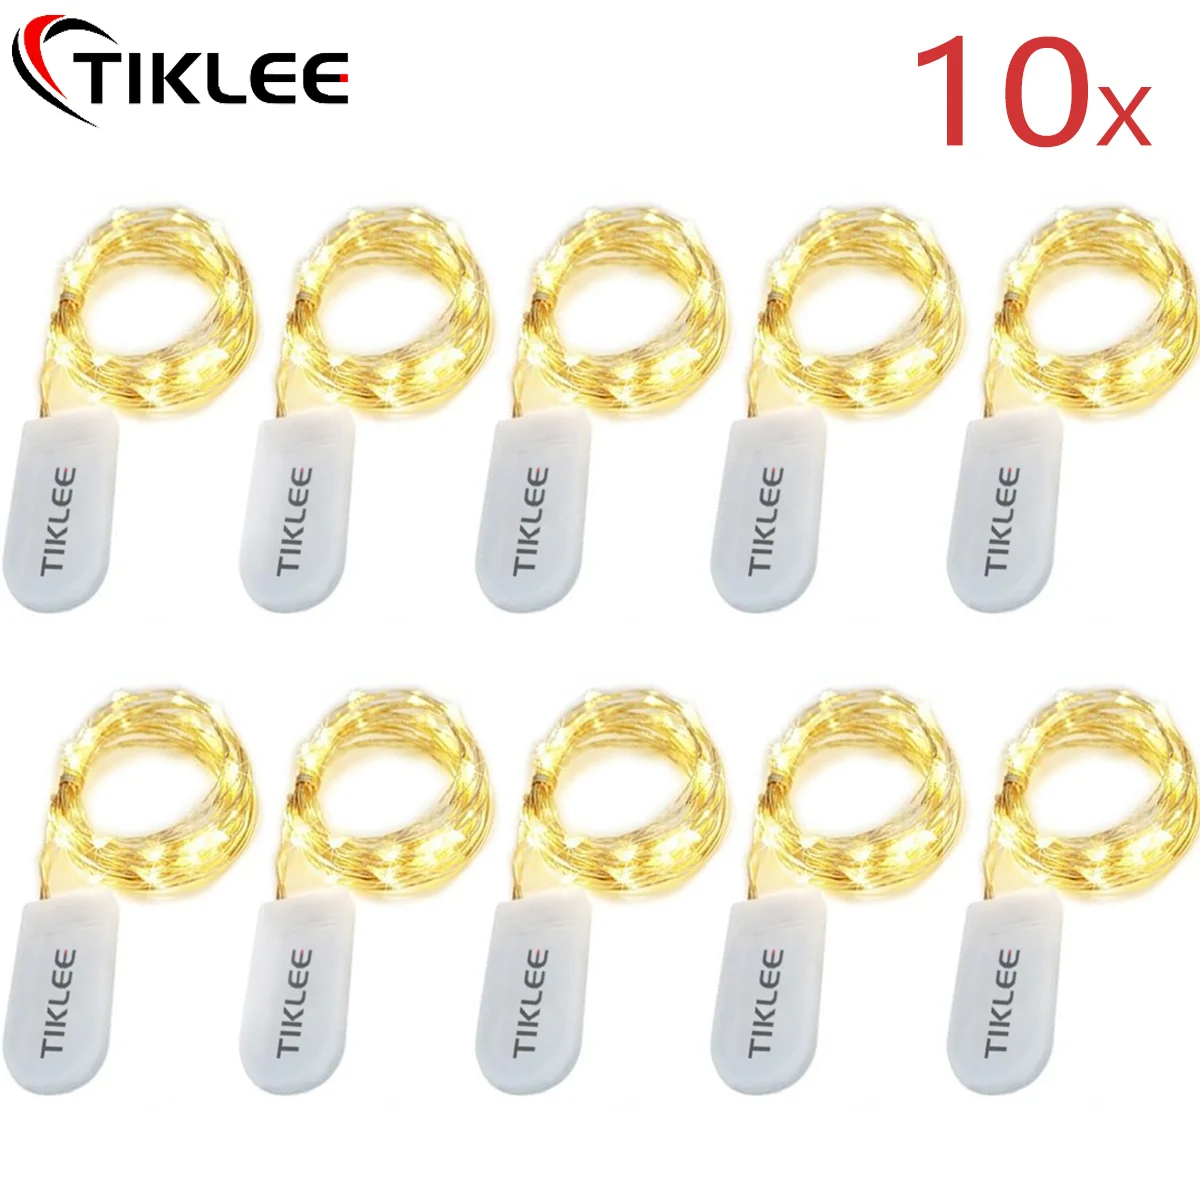 10pcs Led Fairy Lights Battery String Lights Firefly Starry Moon StarLights for DIY Wedding Party Bedroom Patio Christmas e27 led rechargeable emergency bulb 7w dimmable bulb for party patio white light warm white 1800 2200ma